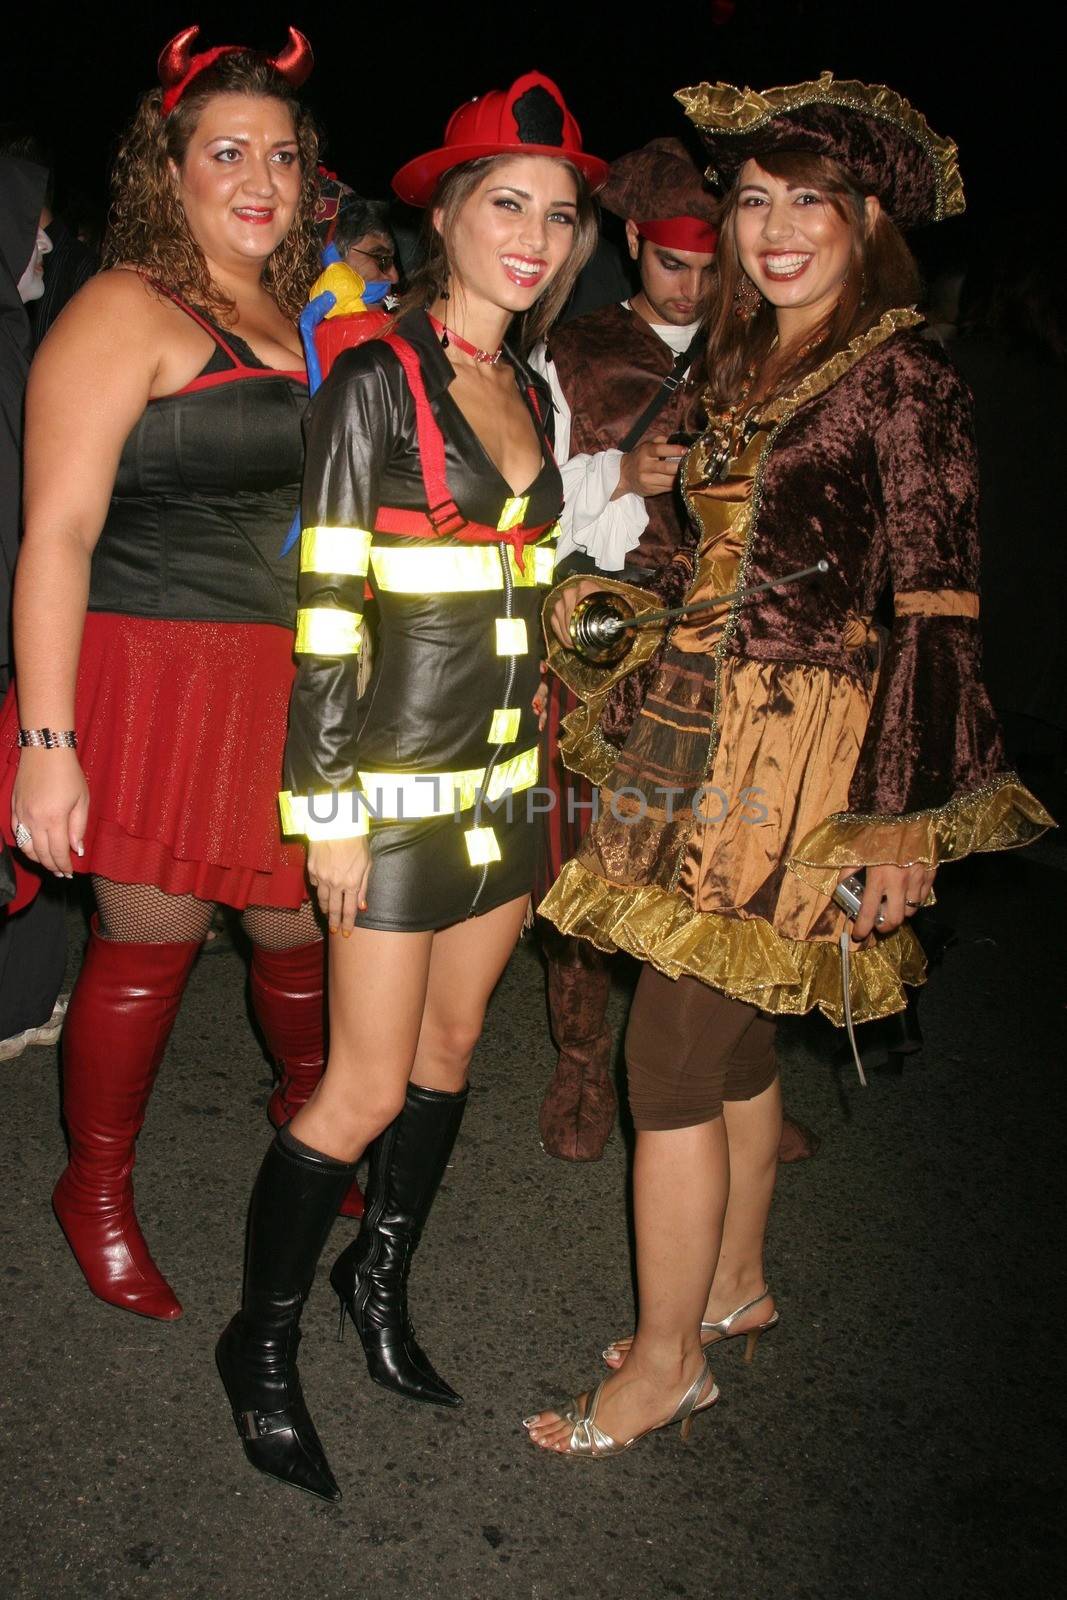 Halloween Revelers
/ImageCollect by ImageCollect